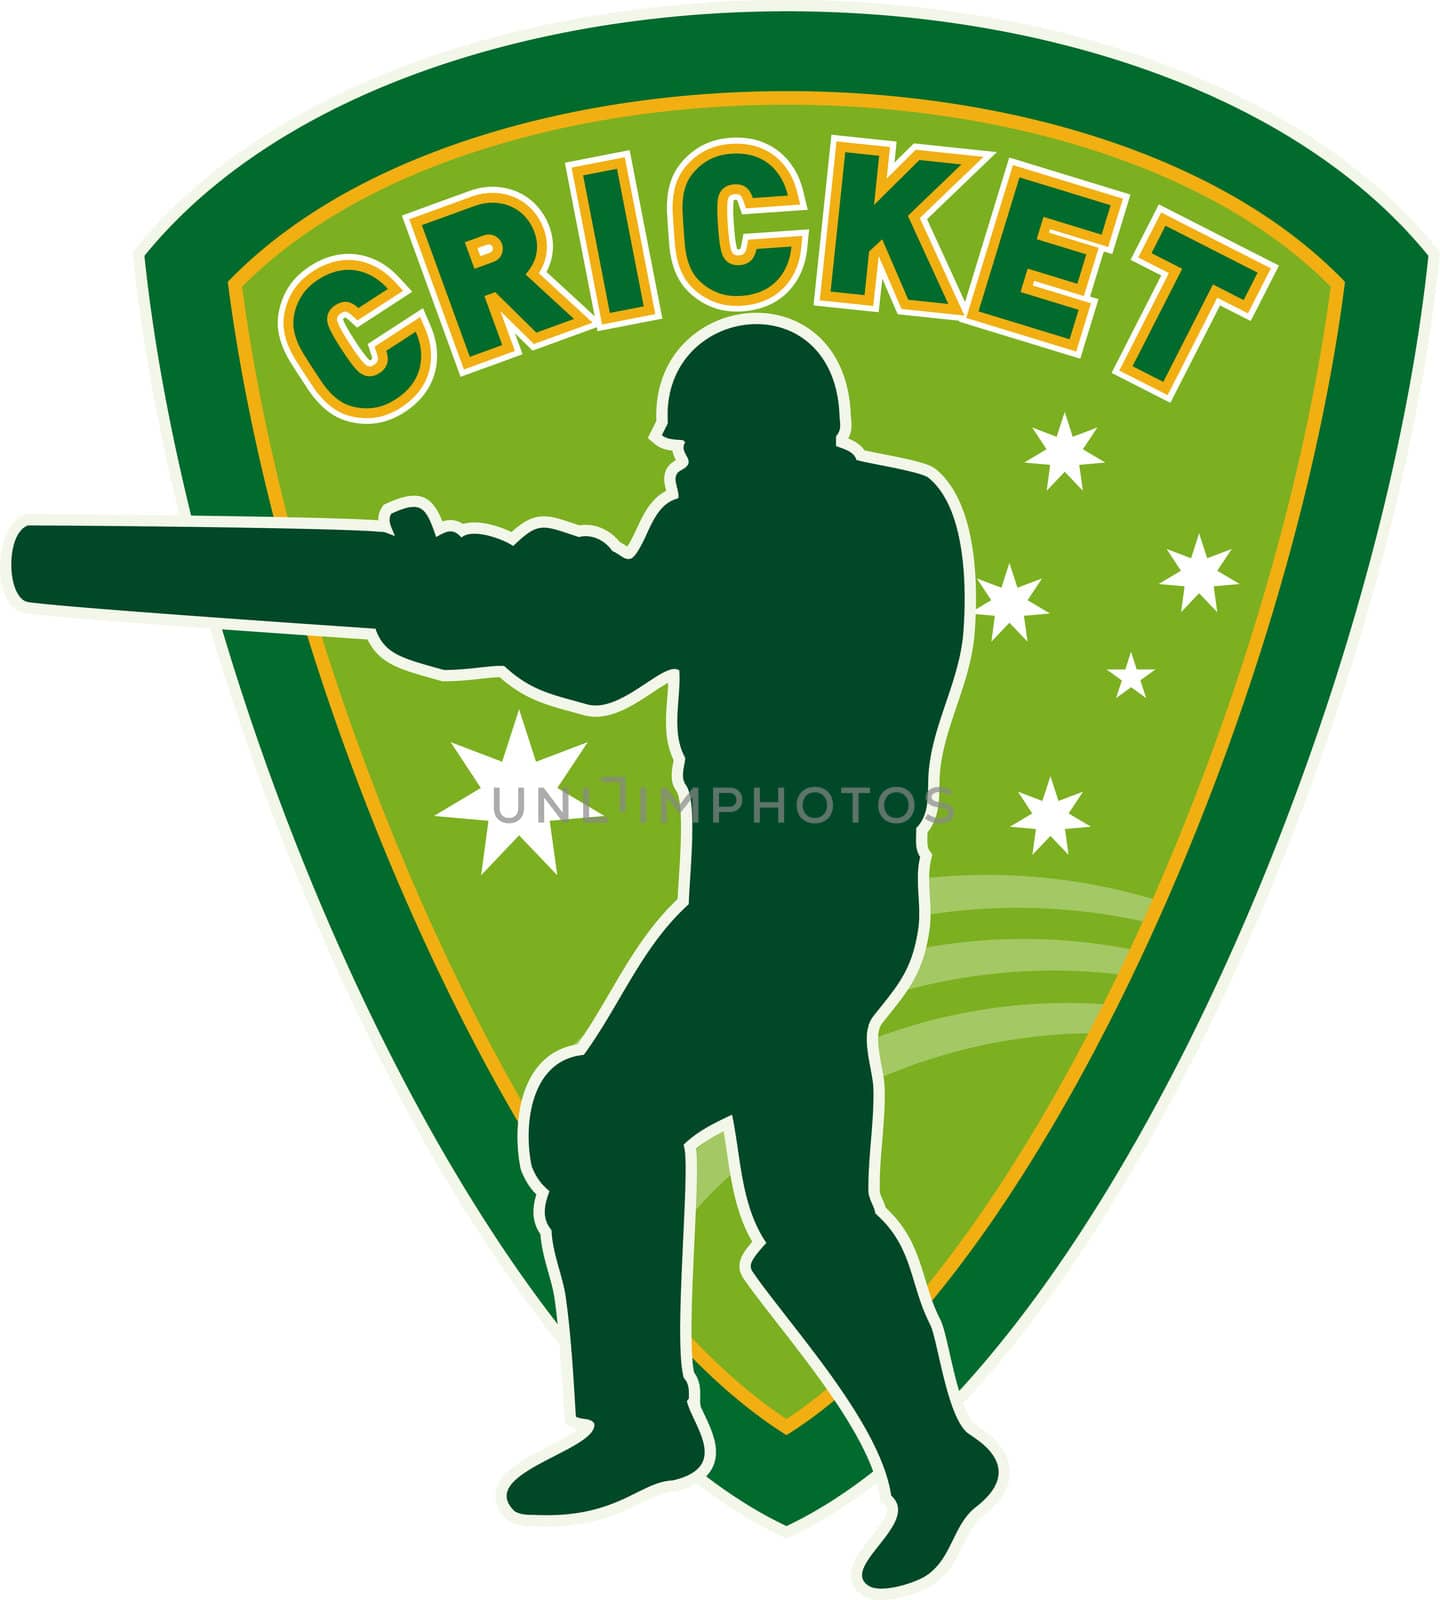 illustration of a cricket sports player batsman silhouette batting set inside shield with stars of australia flag and australian green and gold color